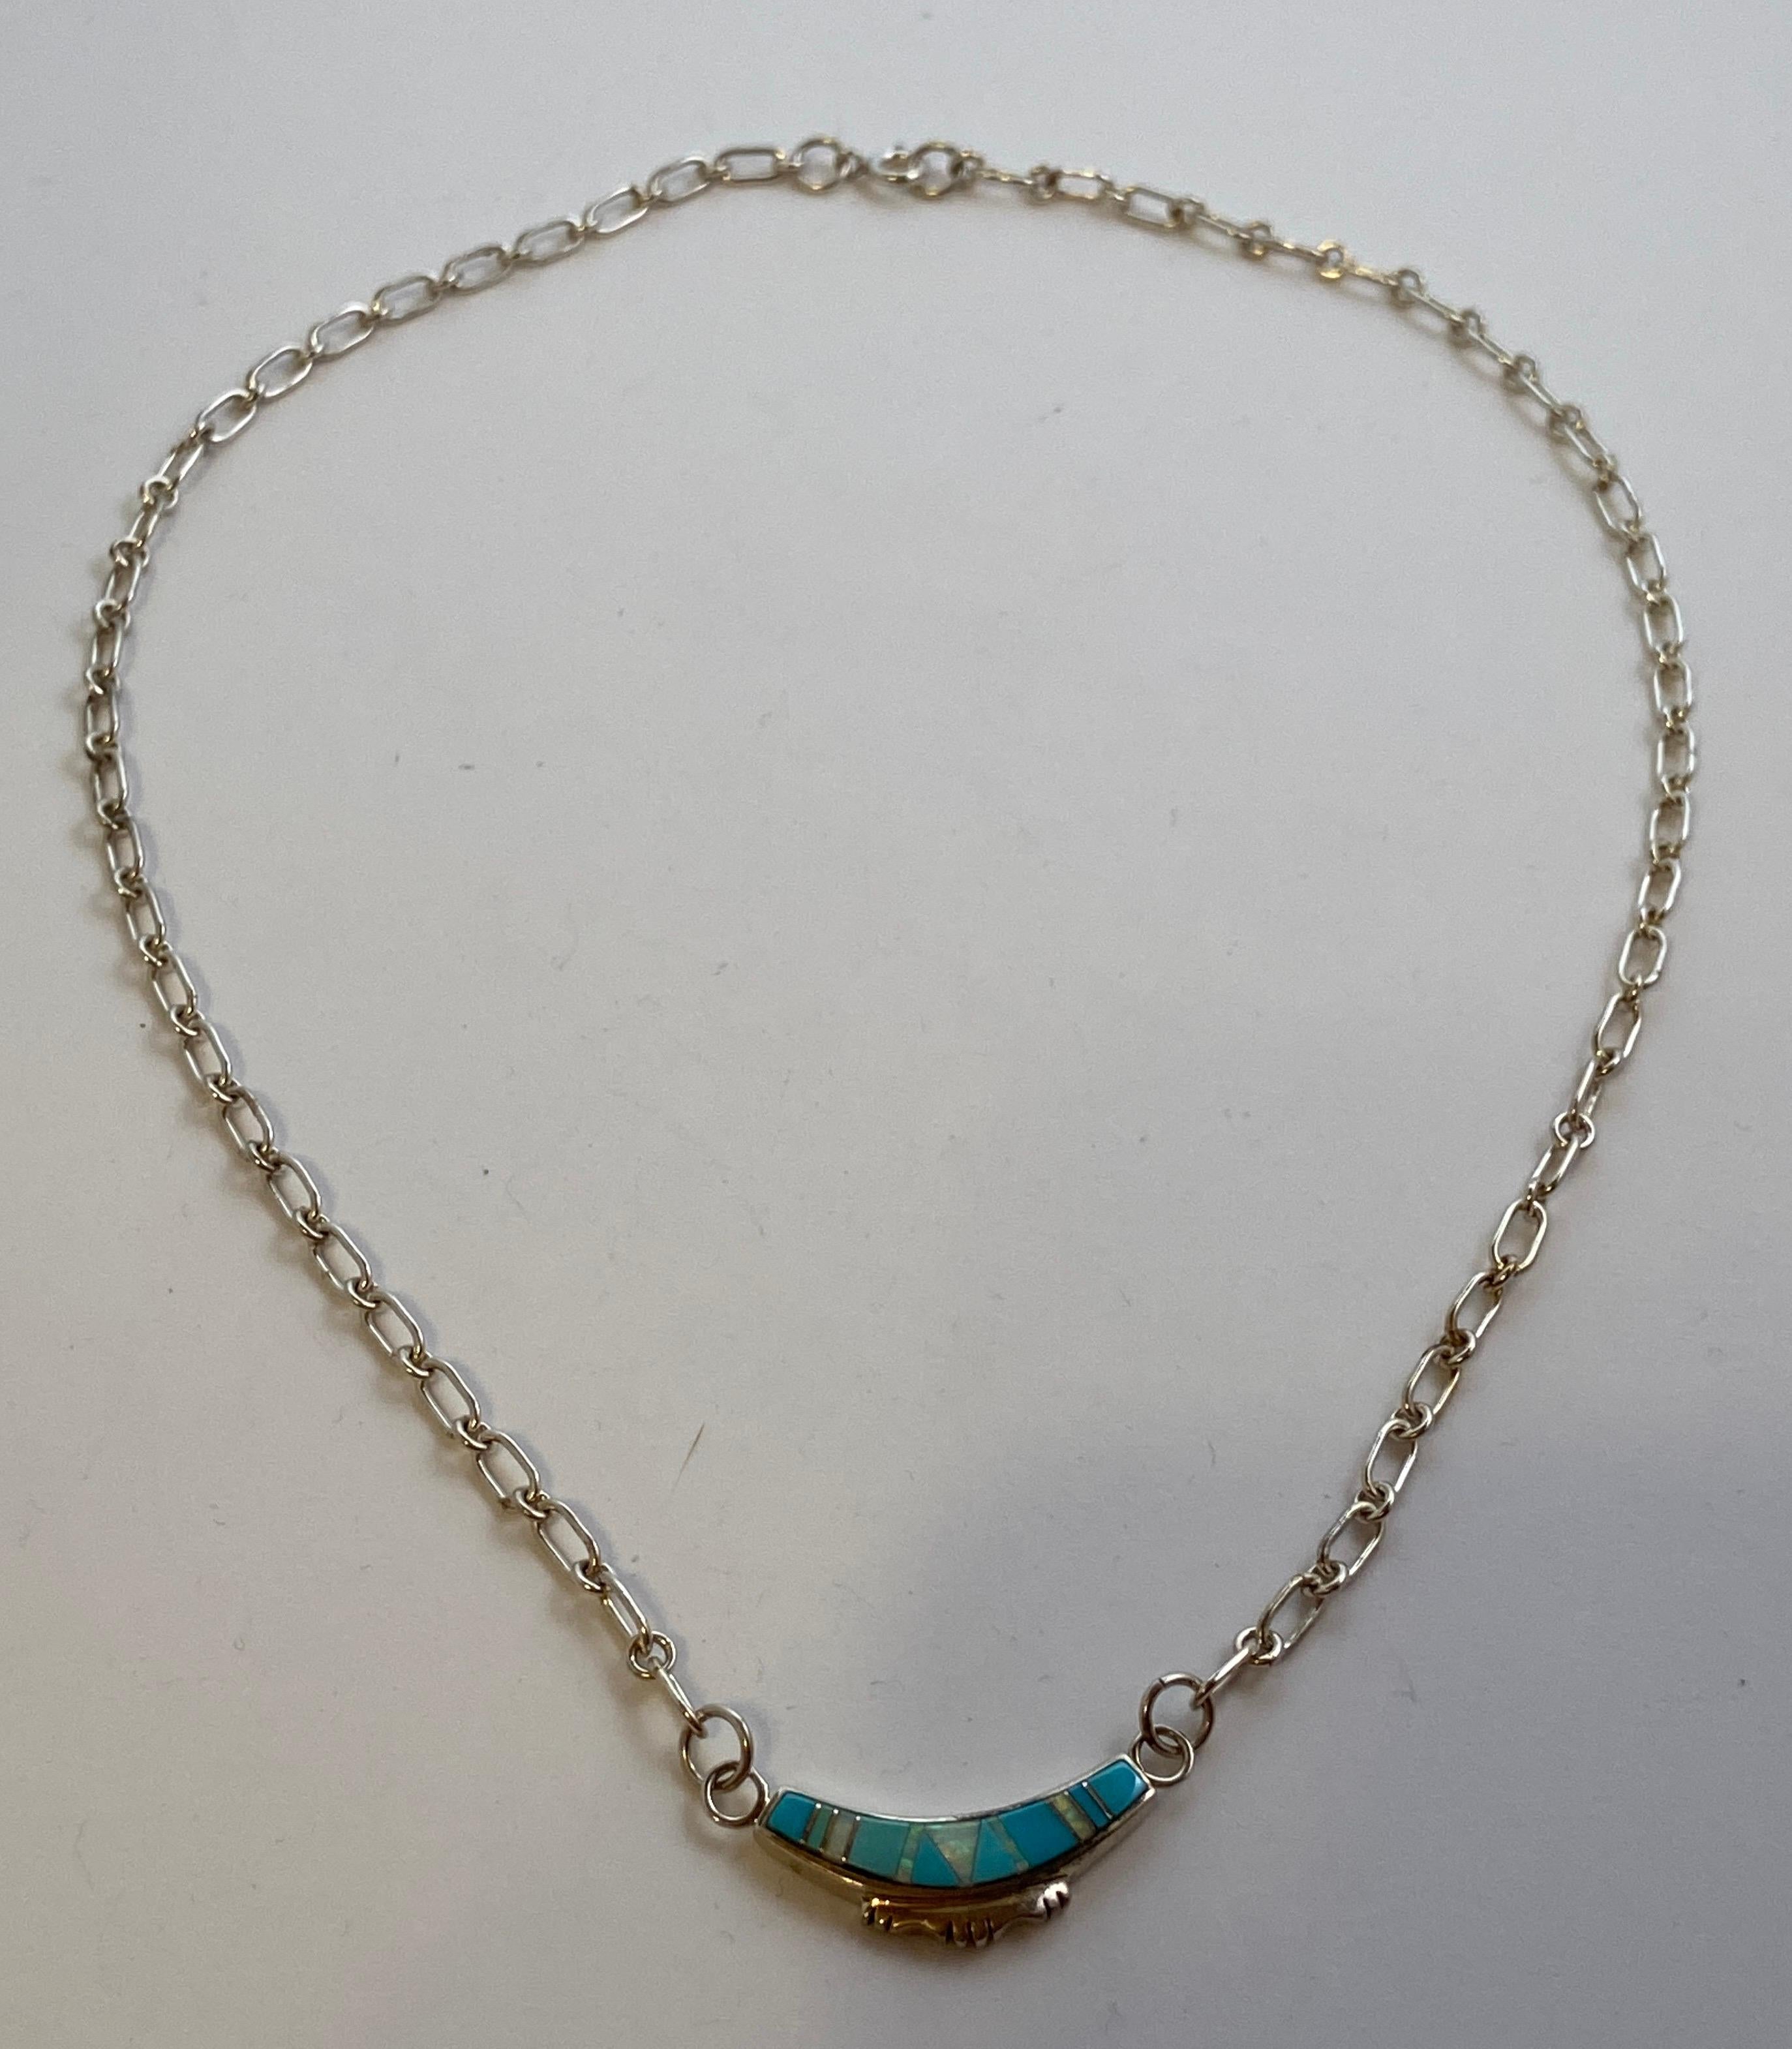 Sterling Silver chain-link necklace is highlighted with a sterling silver pendant accented with opal and turquoise and silver. The pendant measures 1 1/8 inches by 2/8 of a inch. The total length of the necklace measures 18 inches. Made in US.